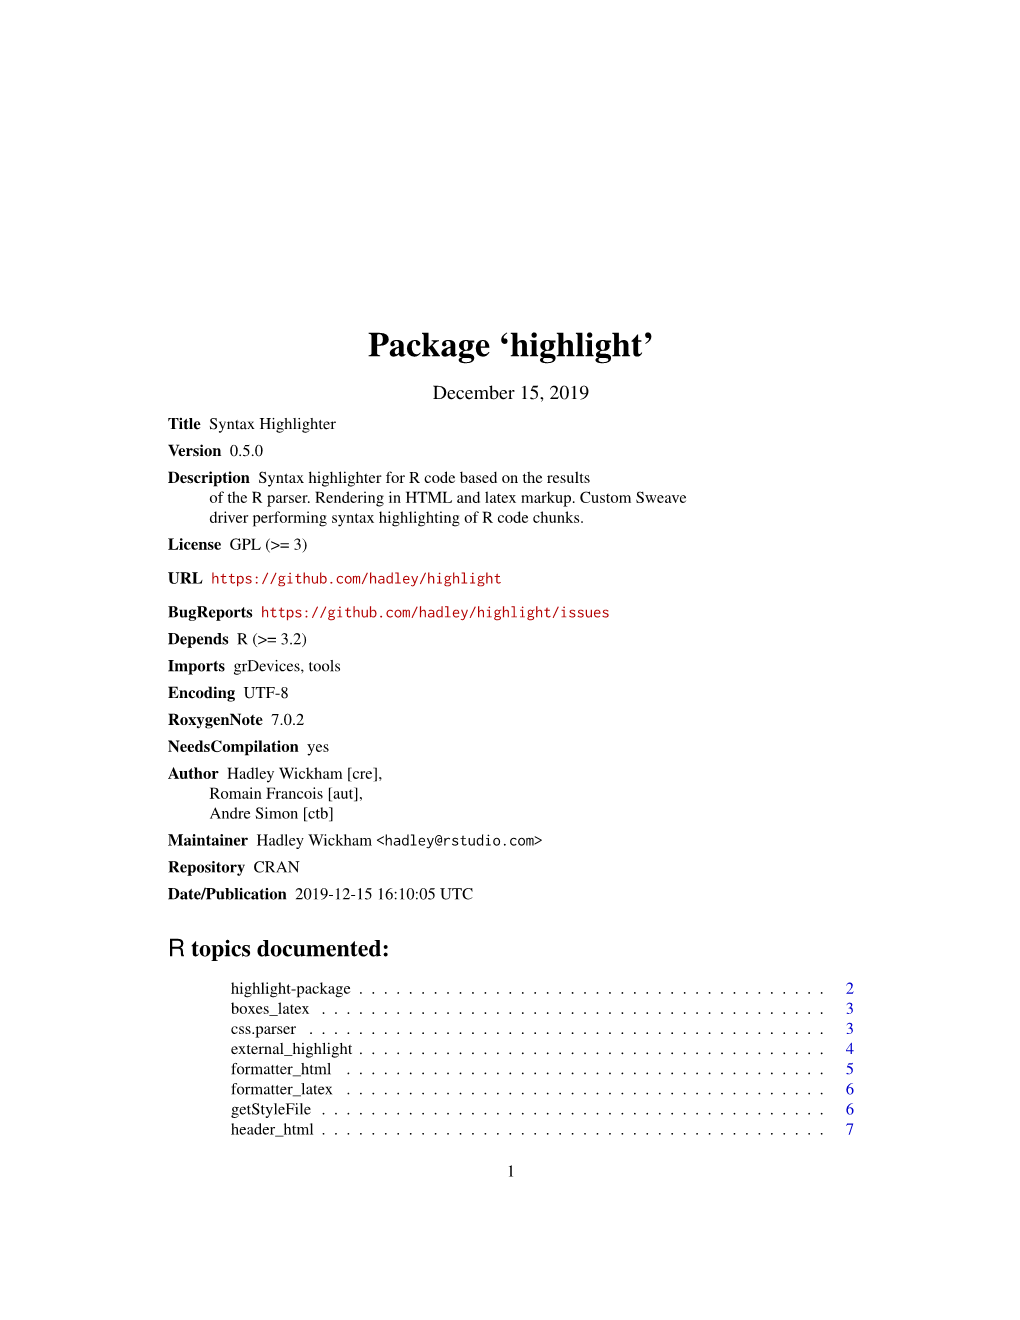 Package 'Highlight'